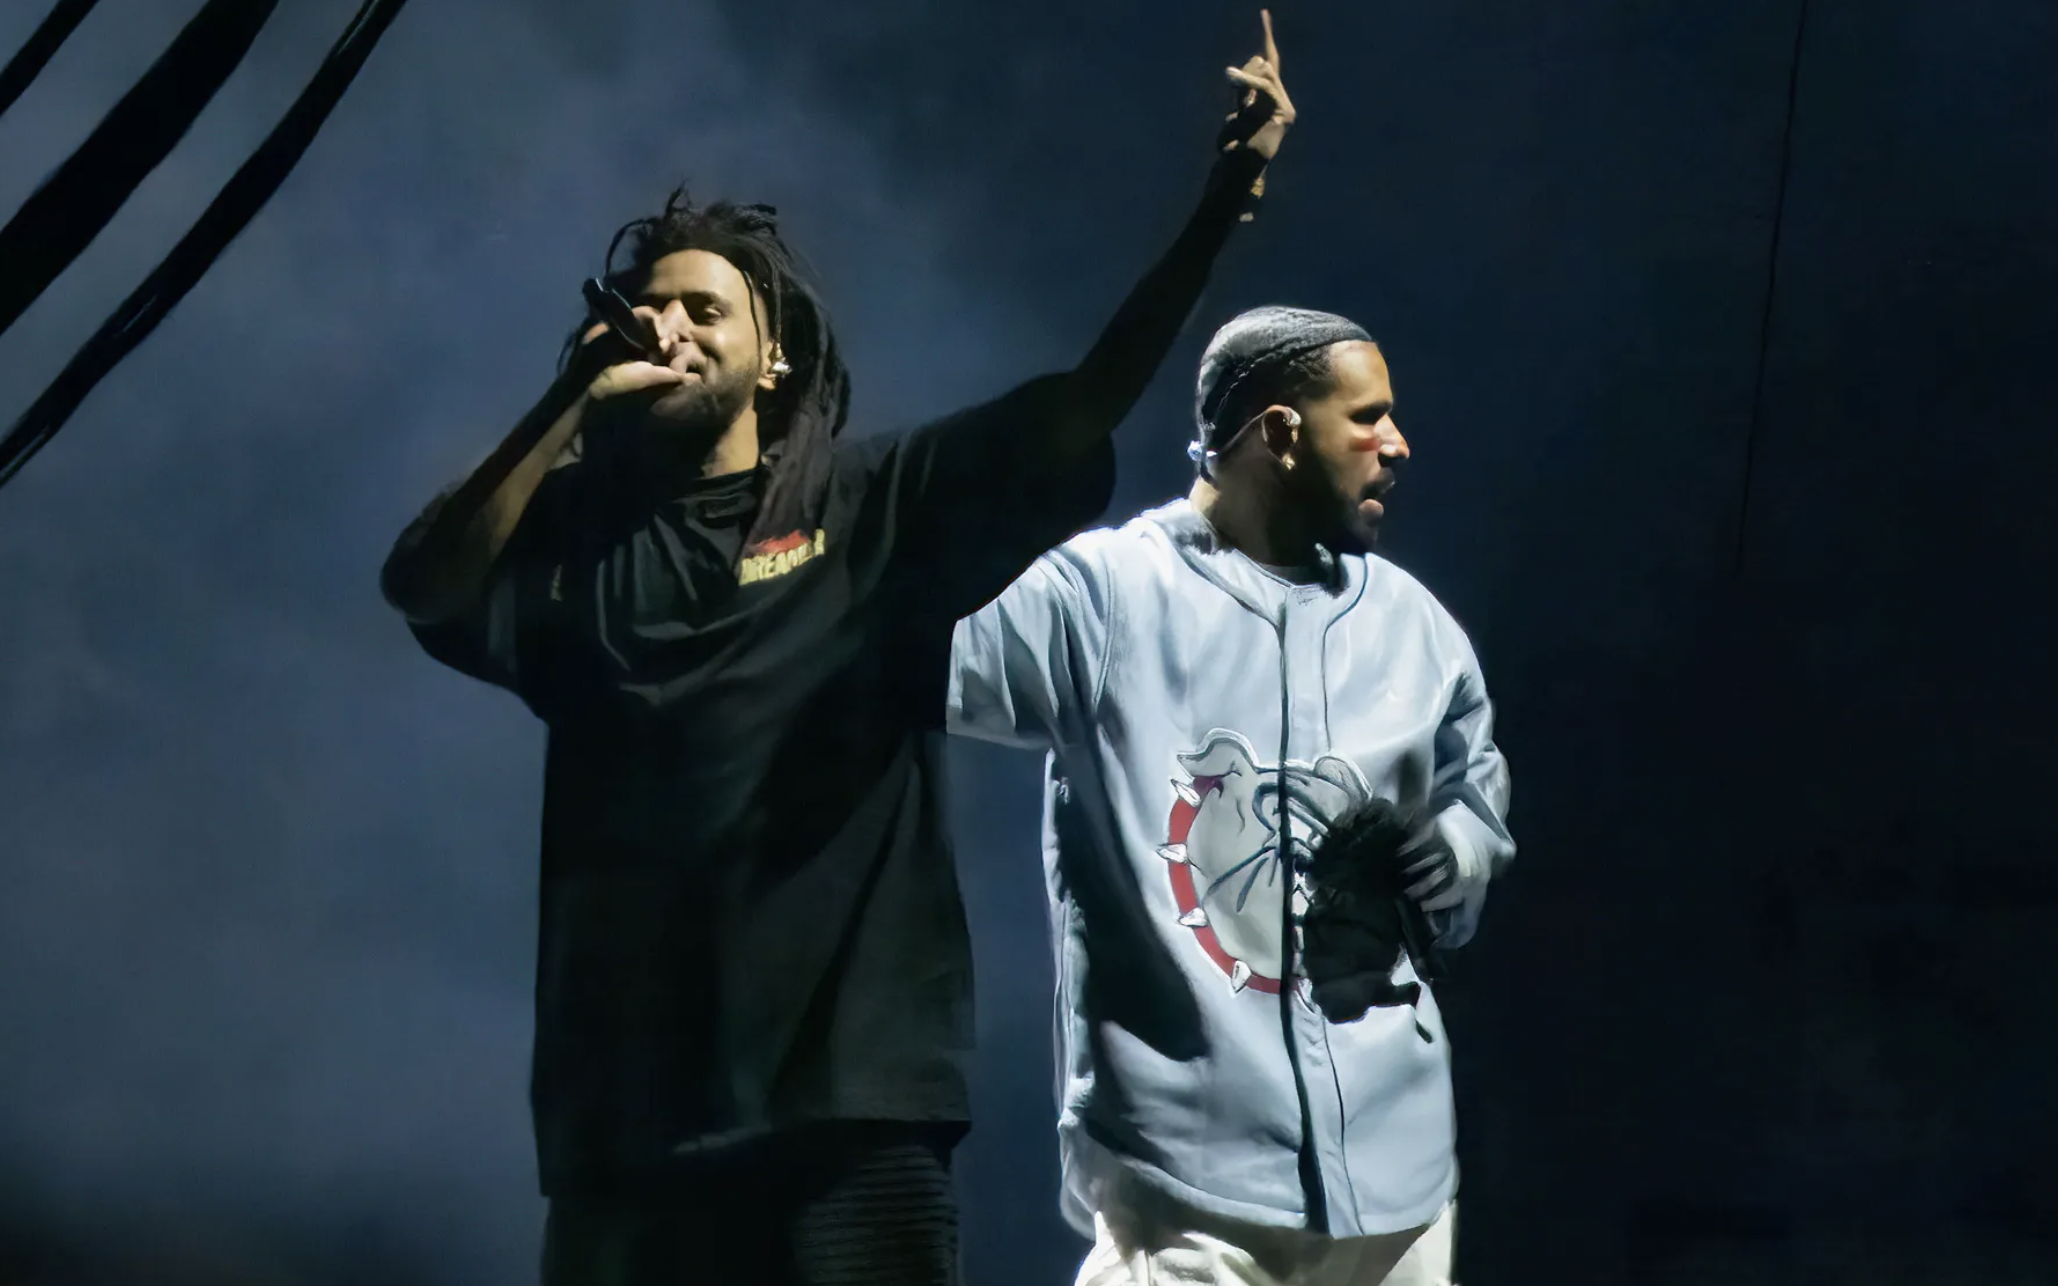 Drake (pictured right) recently toured with J. Cole (pictured left) for his “Its All a Blur” earlier this year (image courtesy: Wire Image).